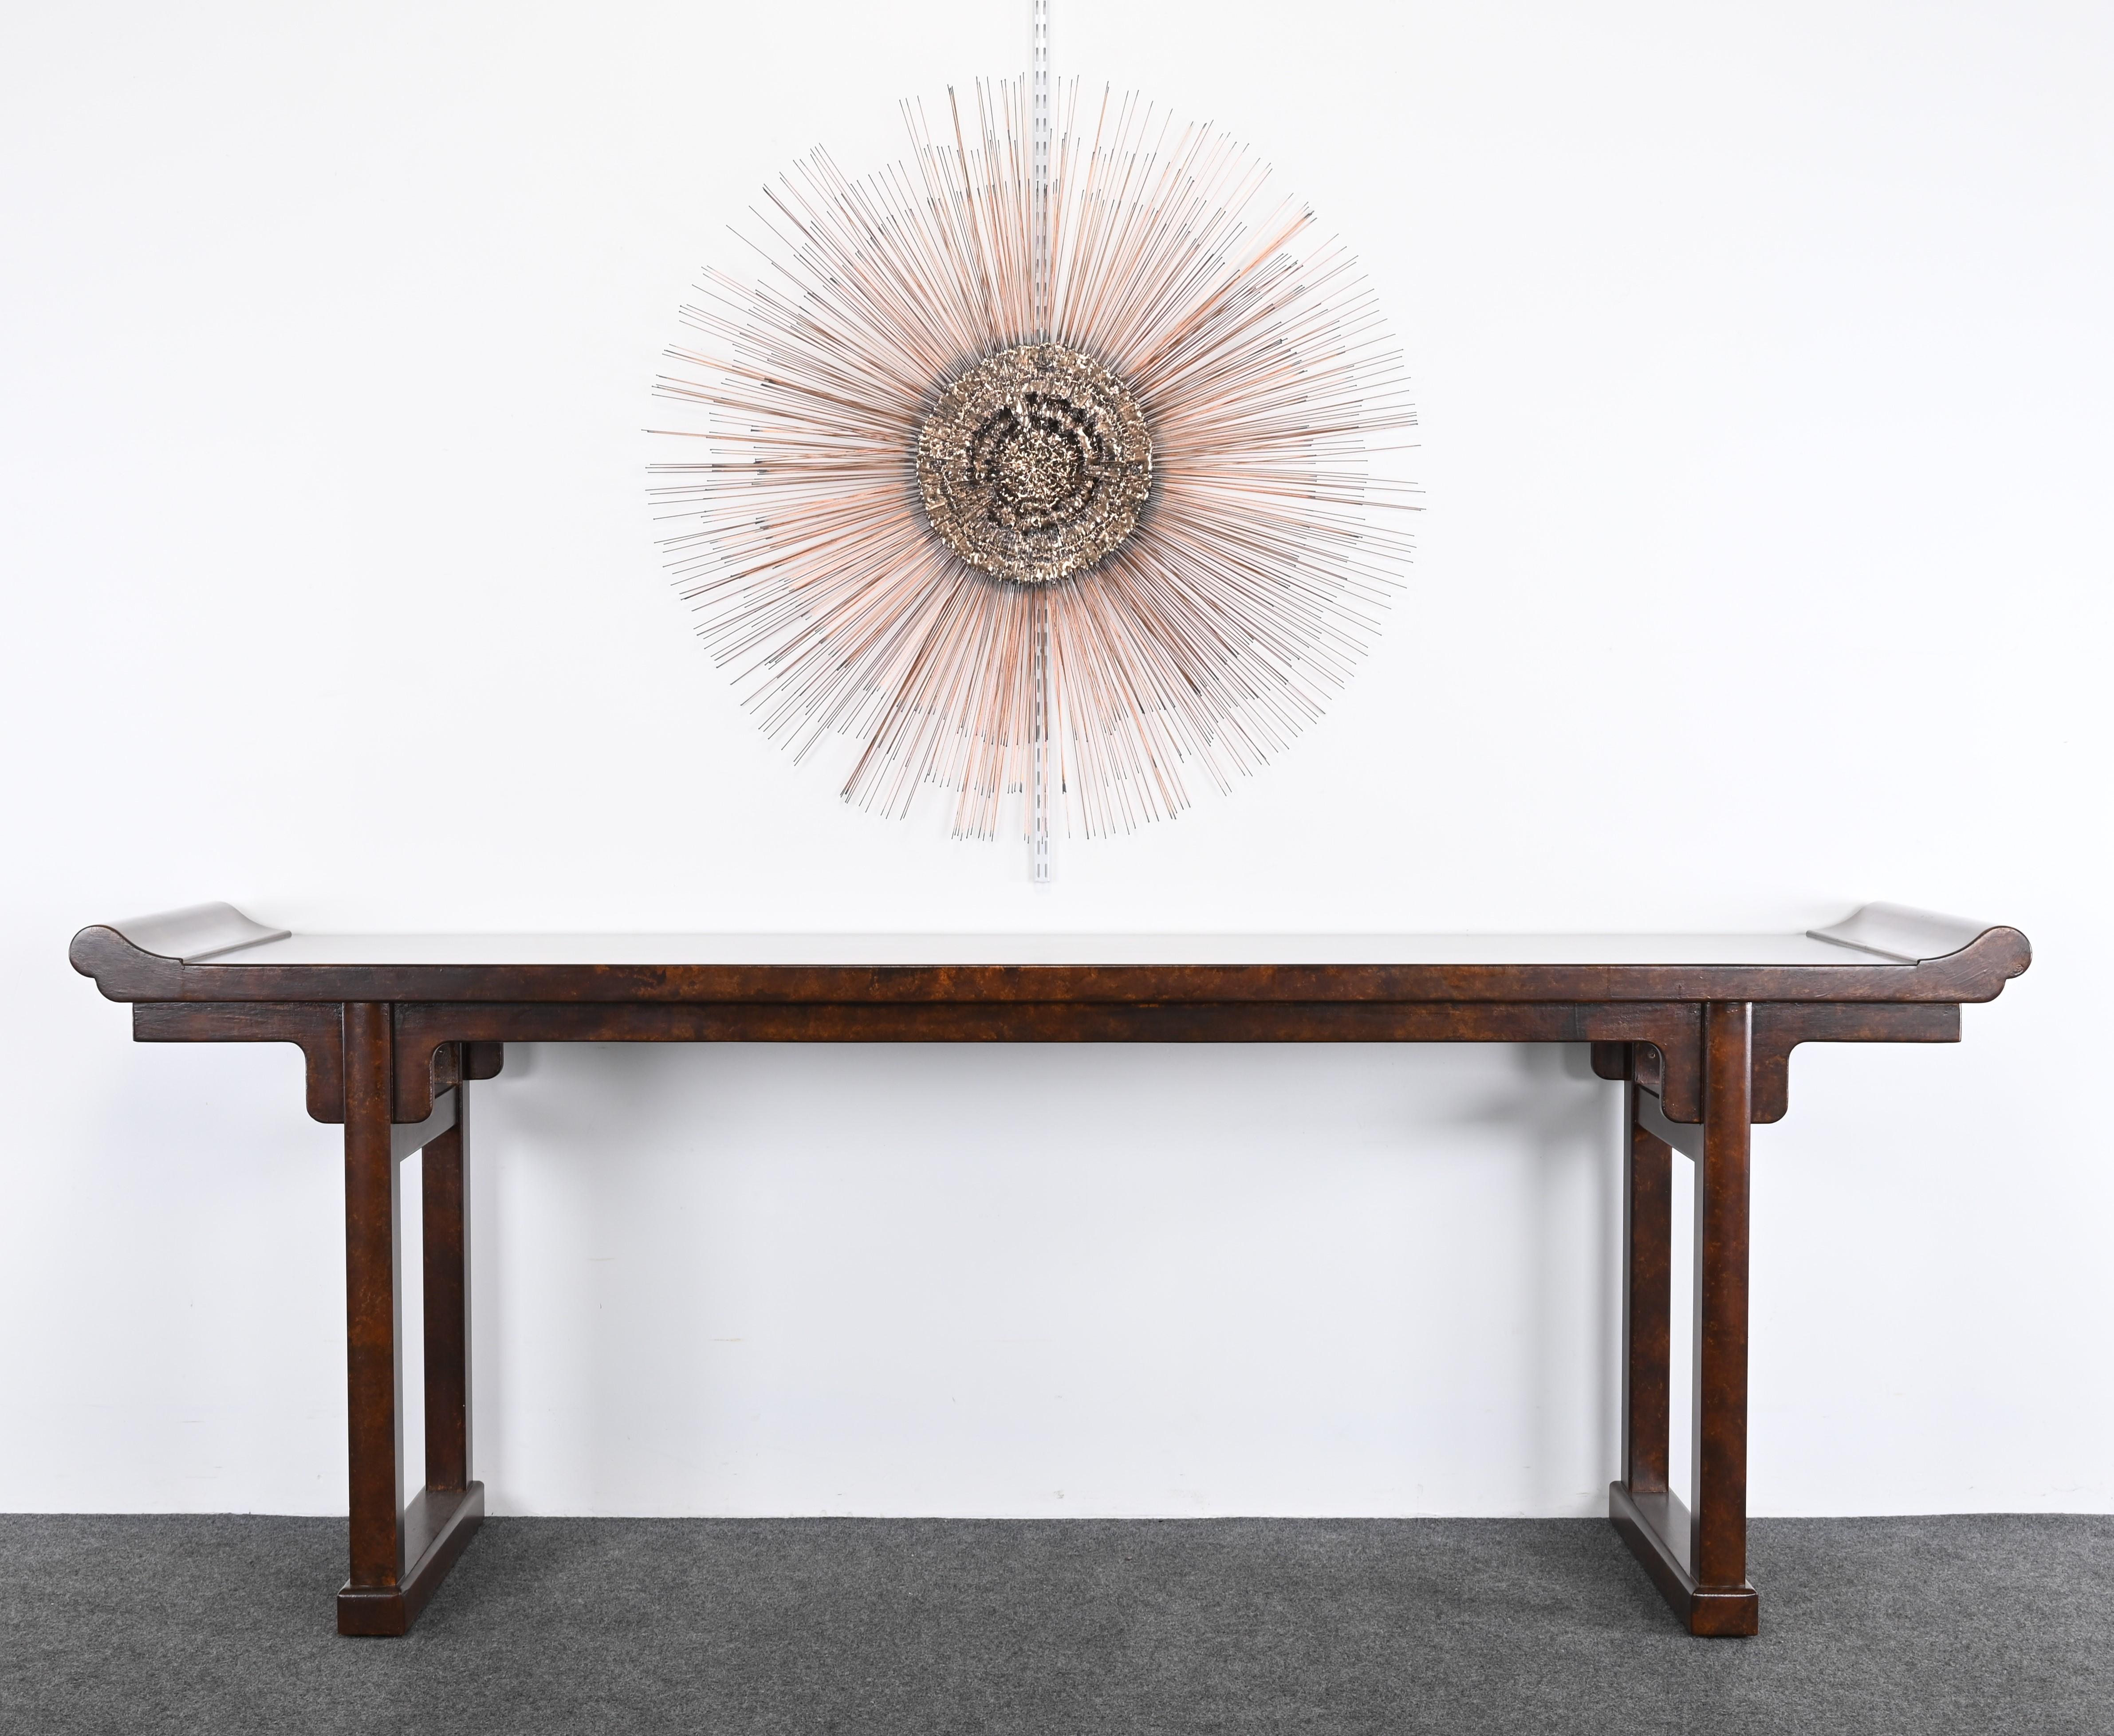 A stunning Chinese Altar Table in the manner of Baker Furniture Company, 20th Century. This Tortoise Shell Finished Console has great scale and is impressive in person. The altar table is a focal point for any interior, whether Traditional, Modern,